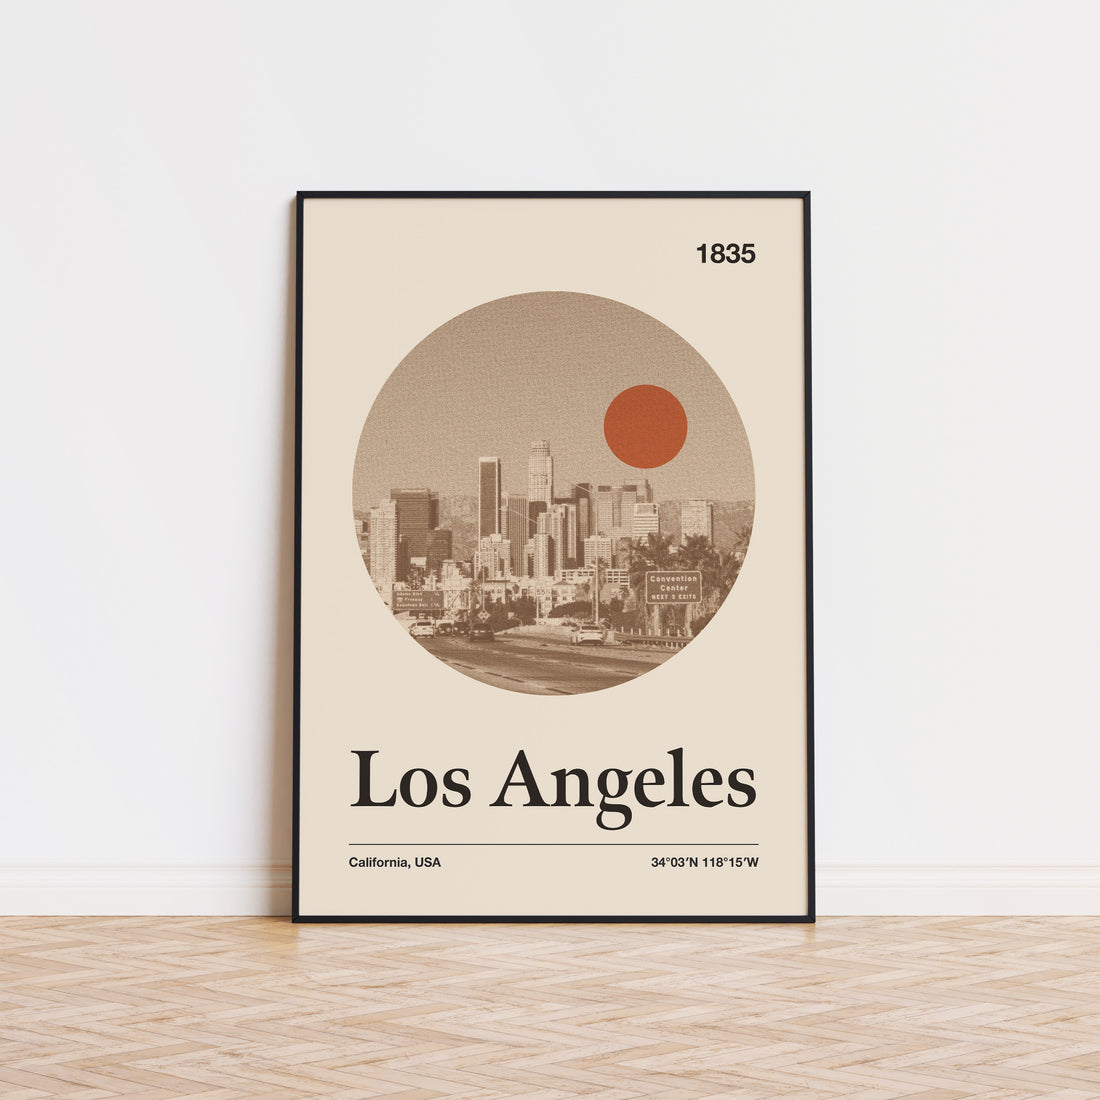 Discover Los Angeles: A City Poster for Every Traveler